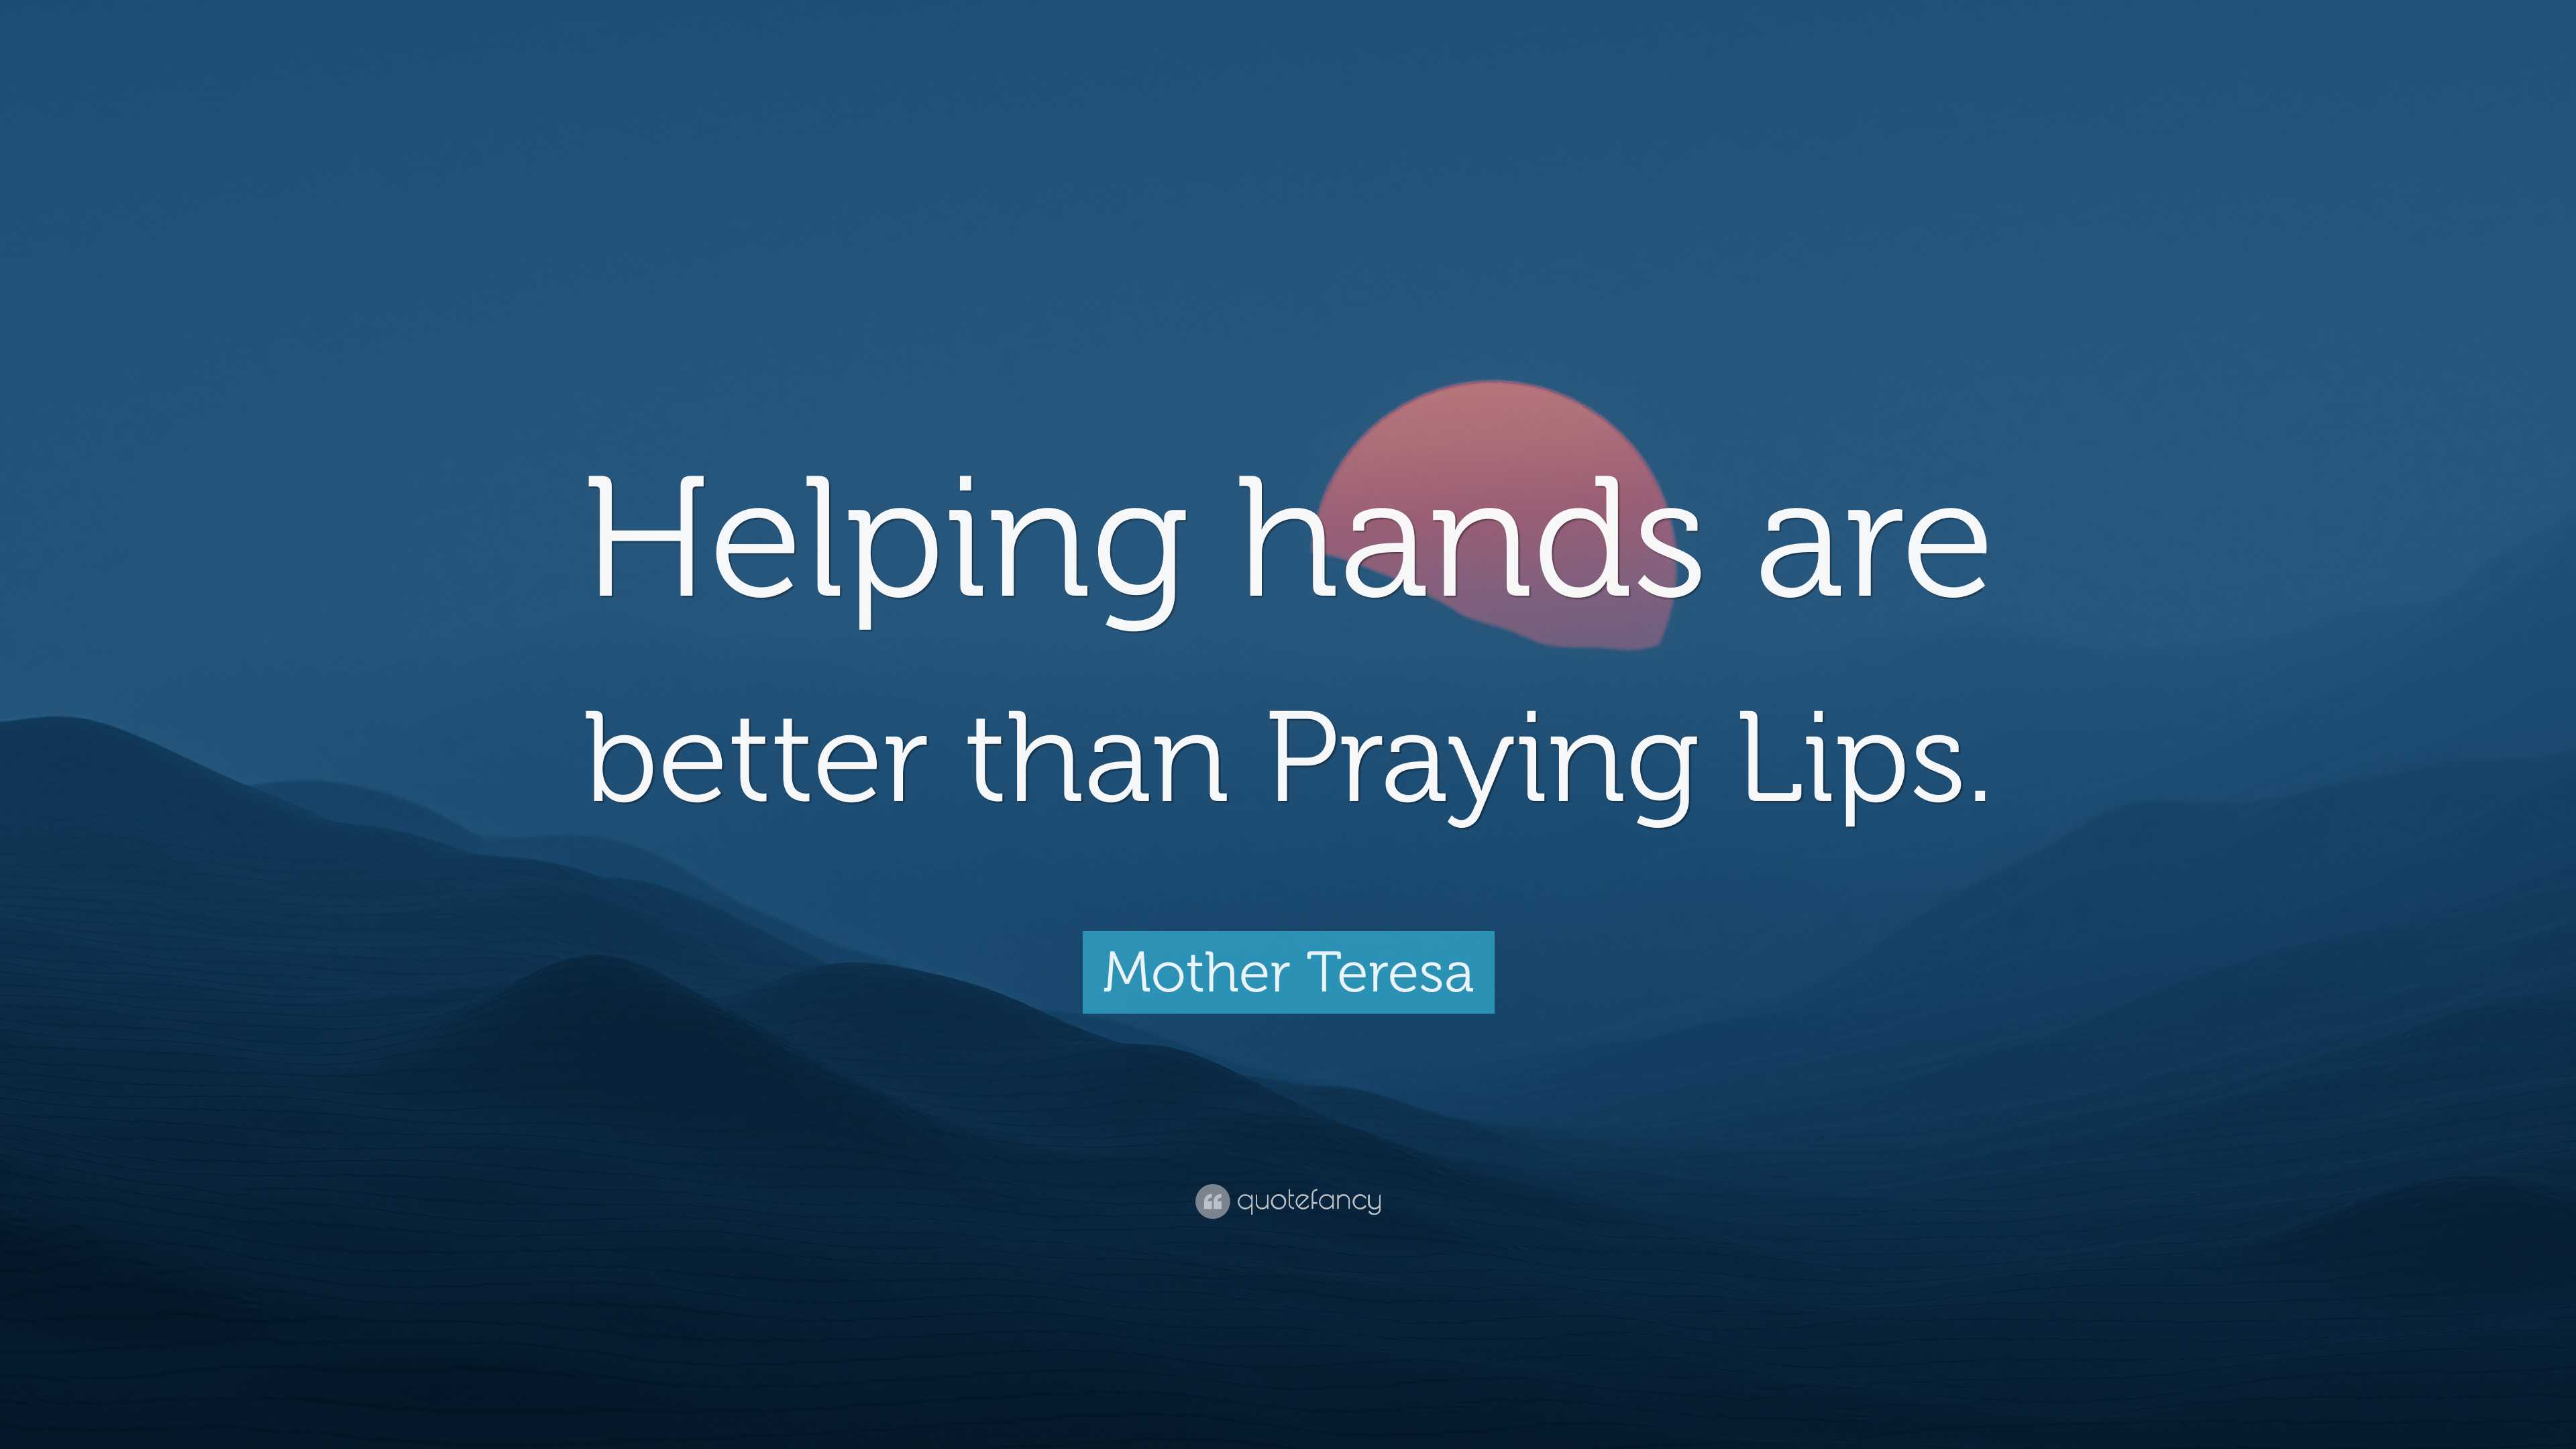 Mother Teresa Quote: “Helping hands are better than Praying Lips.”